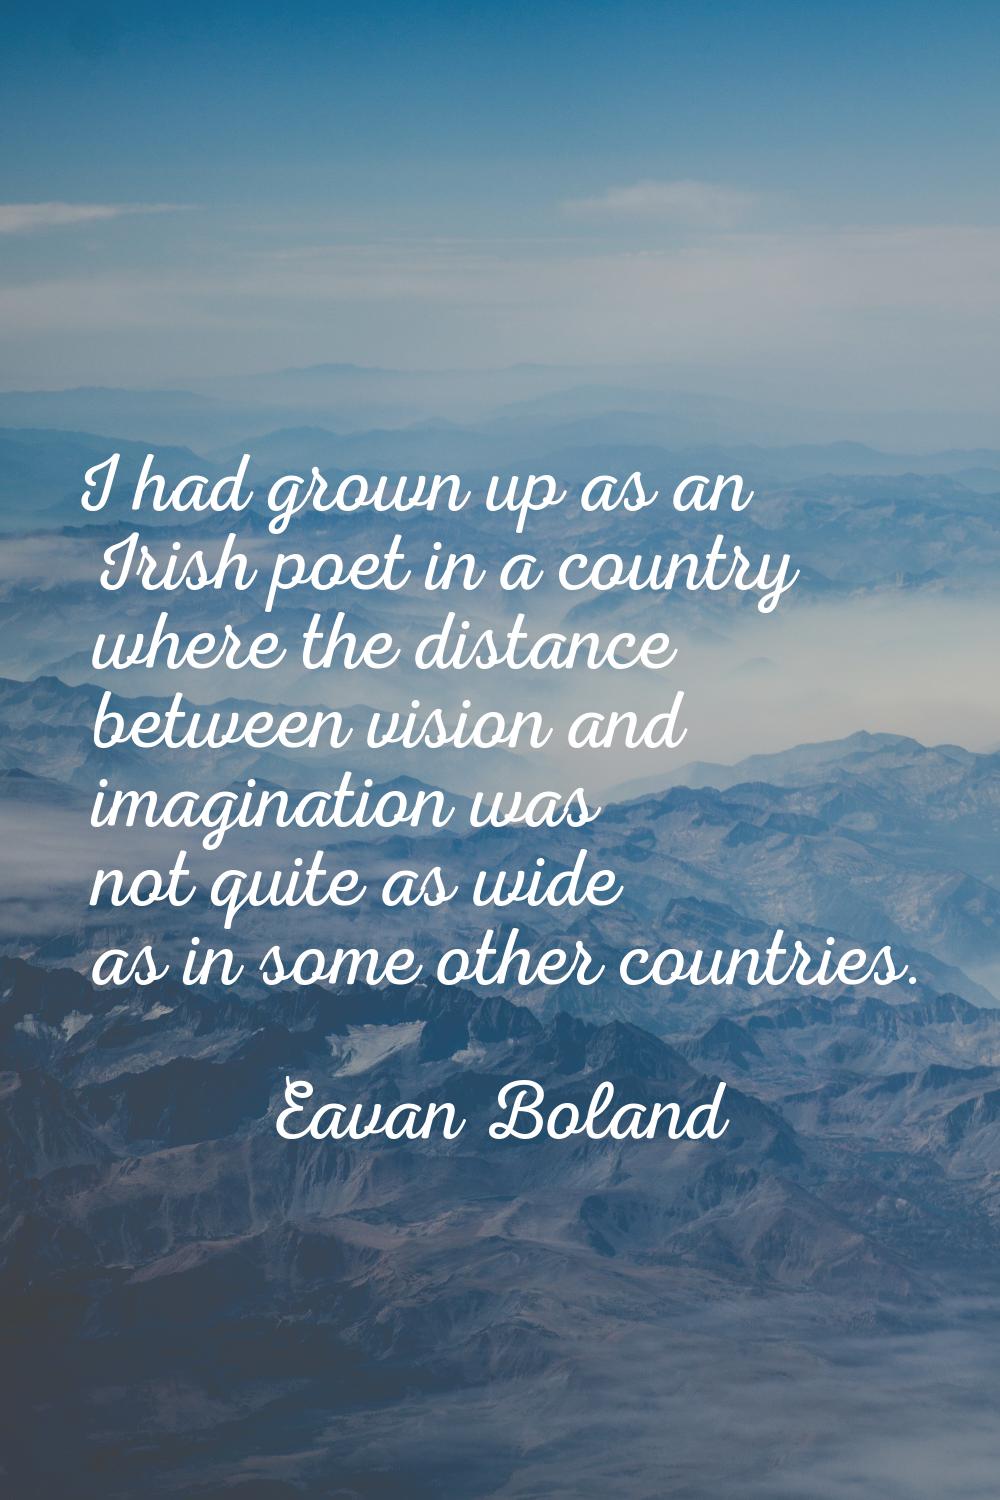 I had grown up as an Irish poet in a country where the distance between vision and imagination was 